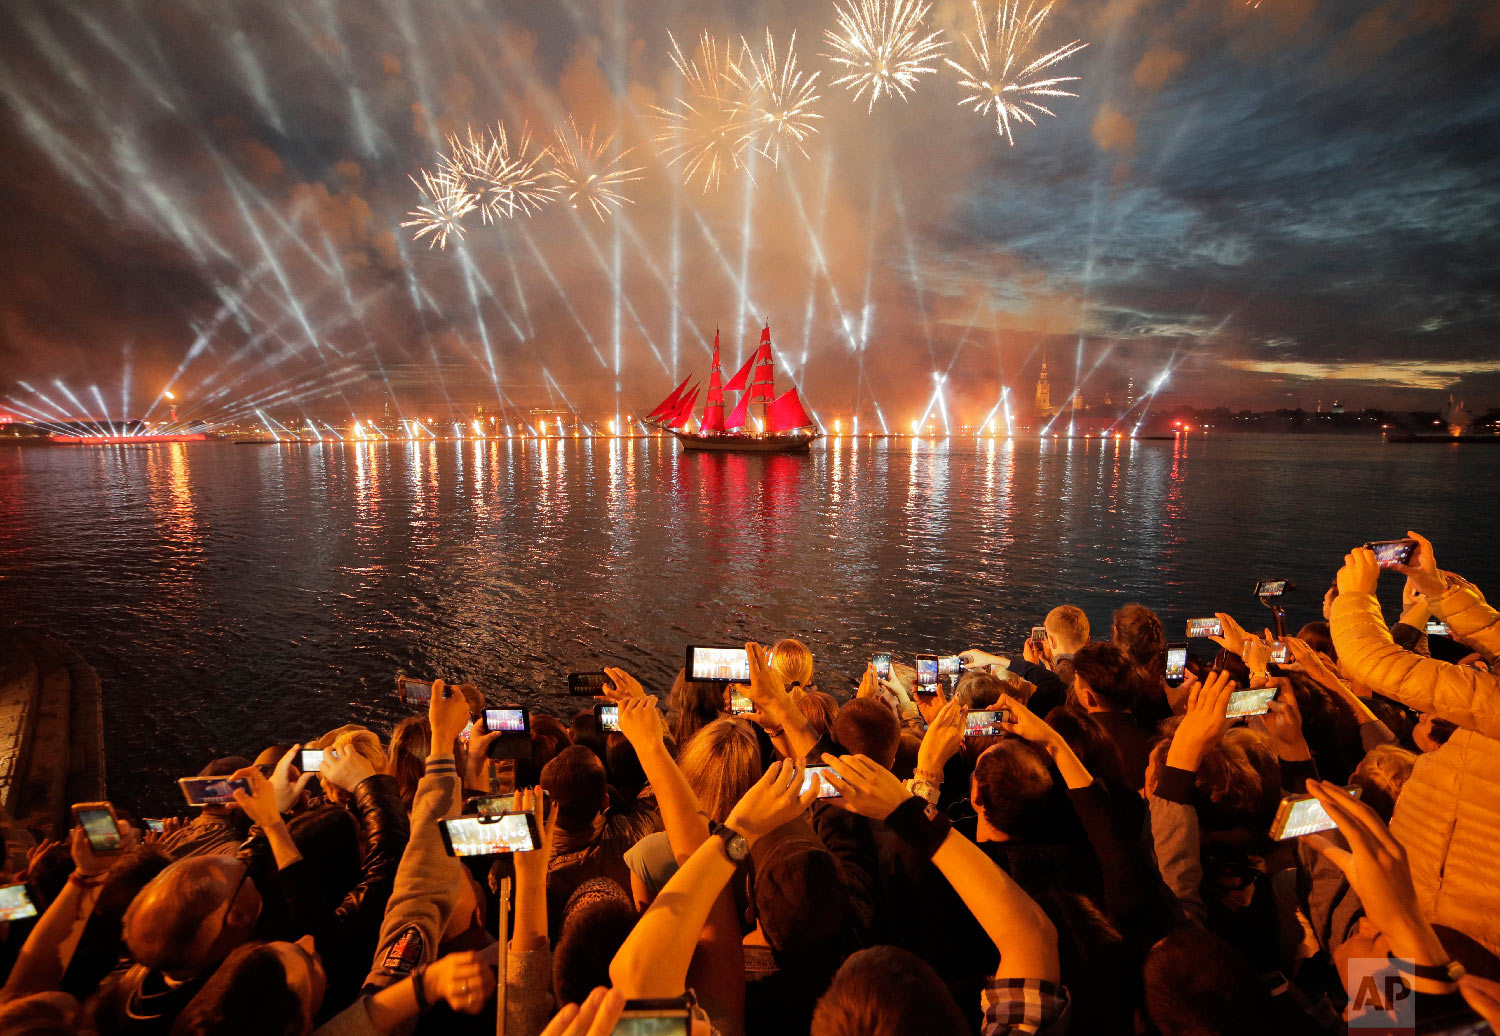  People watch fireworks and a brig with scarlet sails on the Neva River during the Scarlet Sails festivities marking school graduation in St.Petersburg, Russia on June 24, 2018. (AP Photo/Dmitri Lovetsky) 